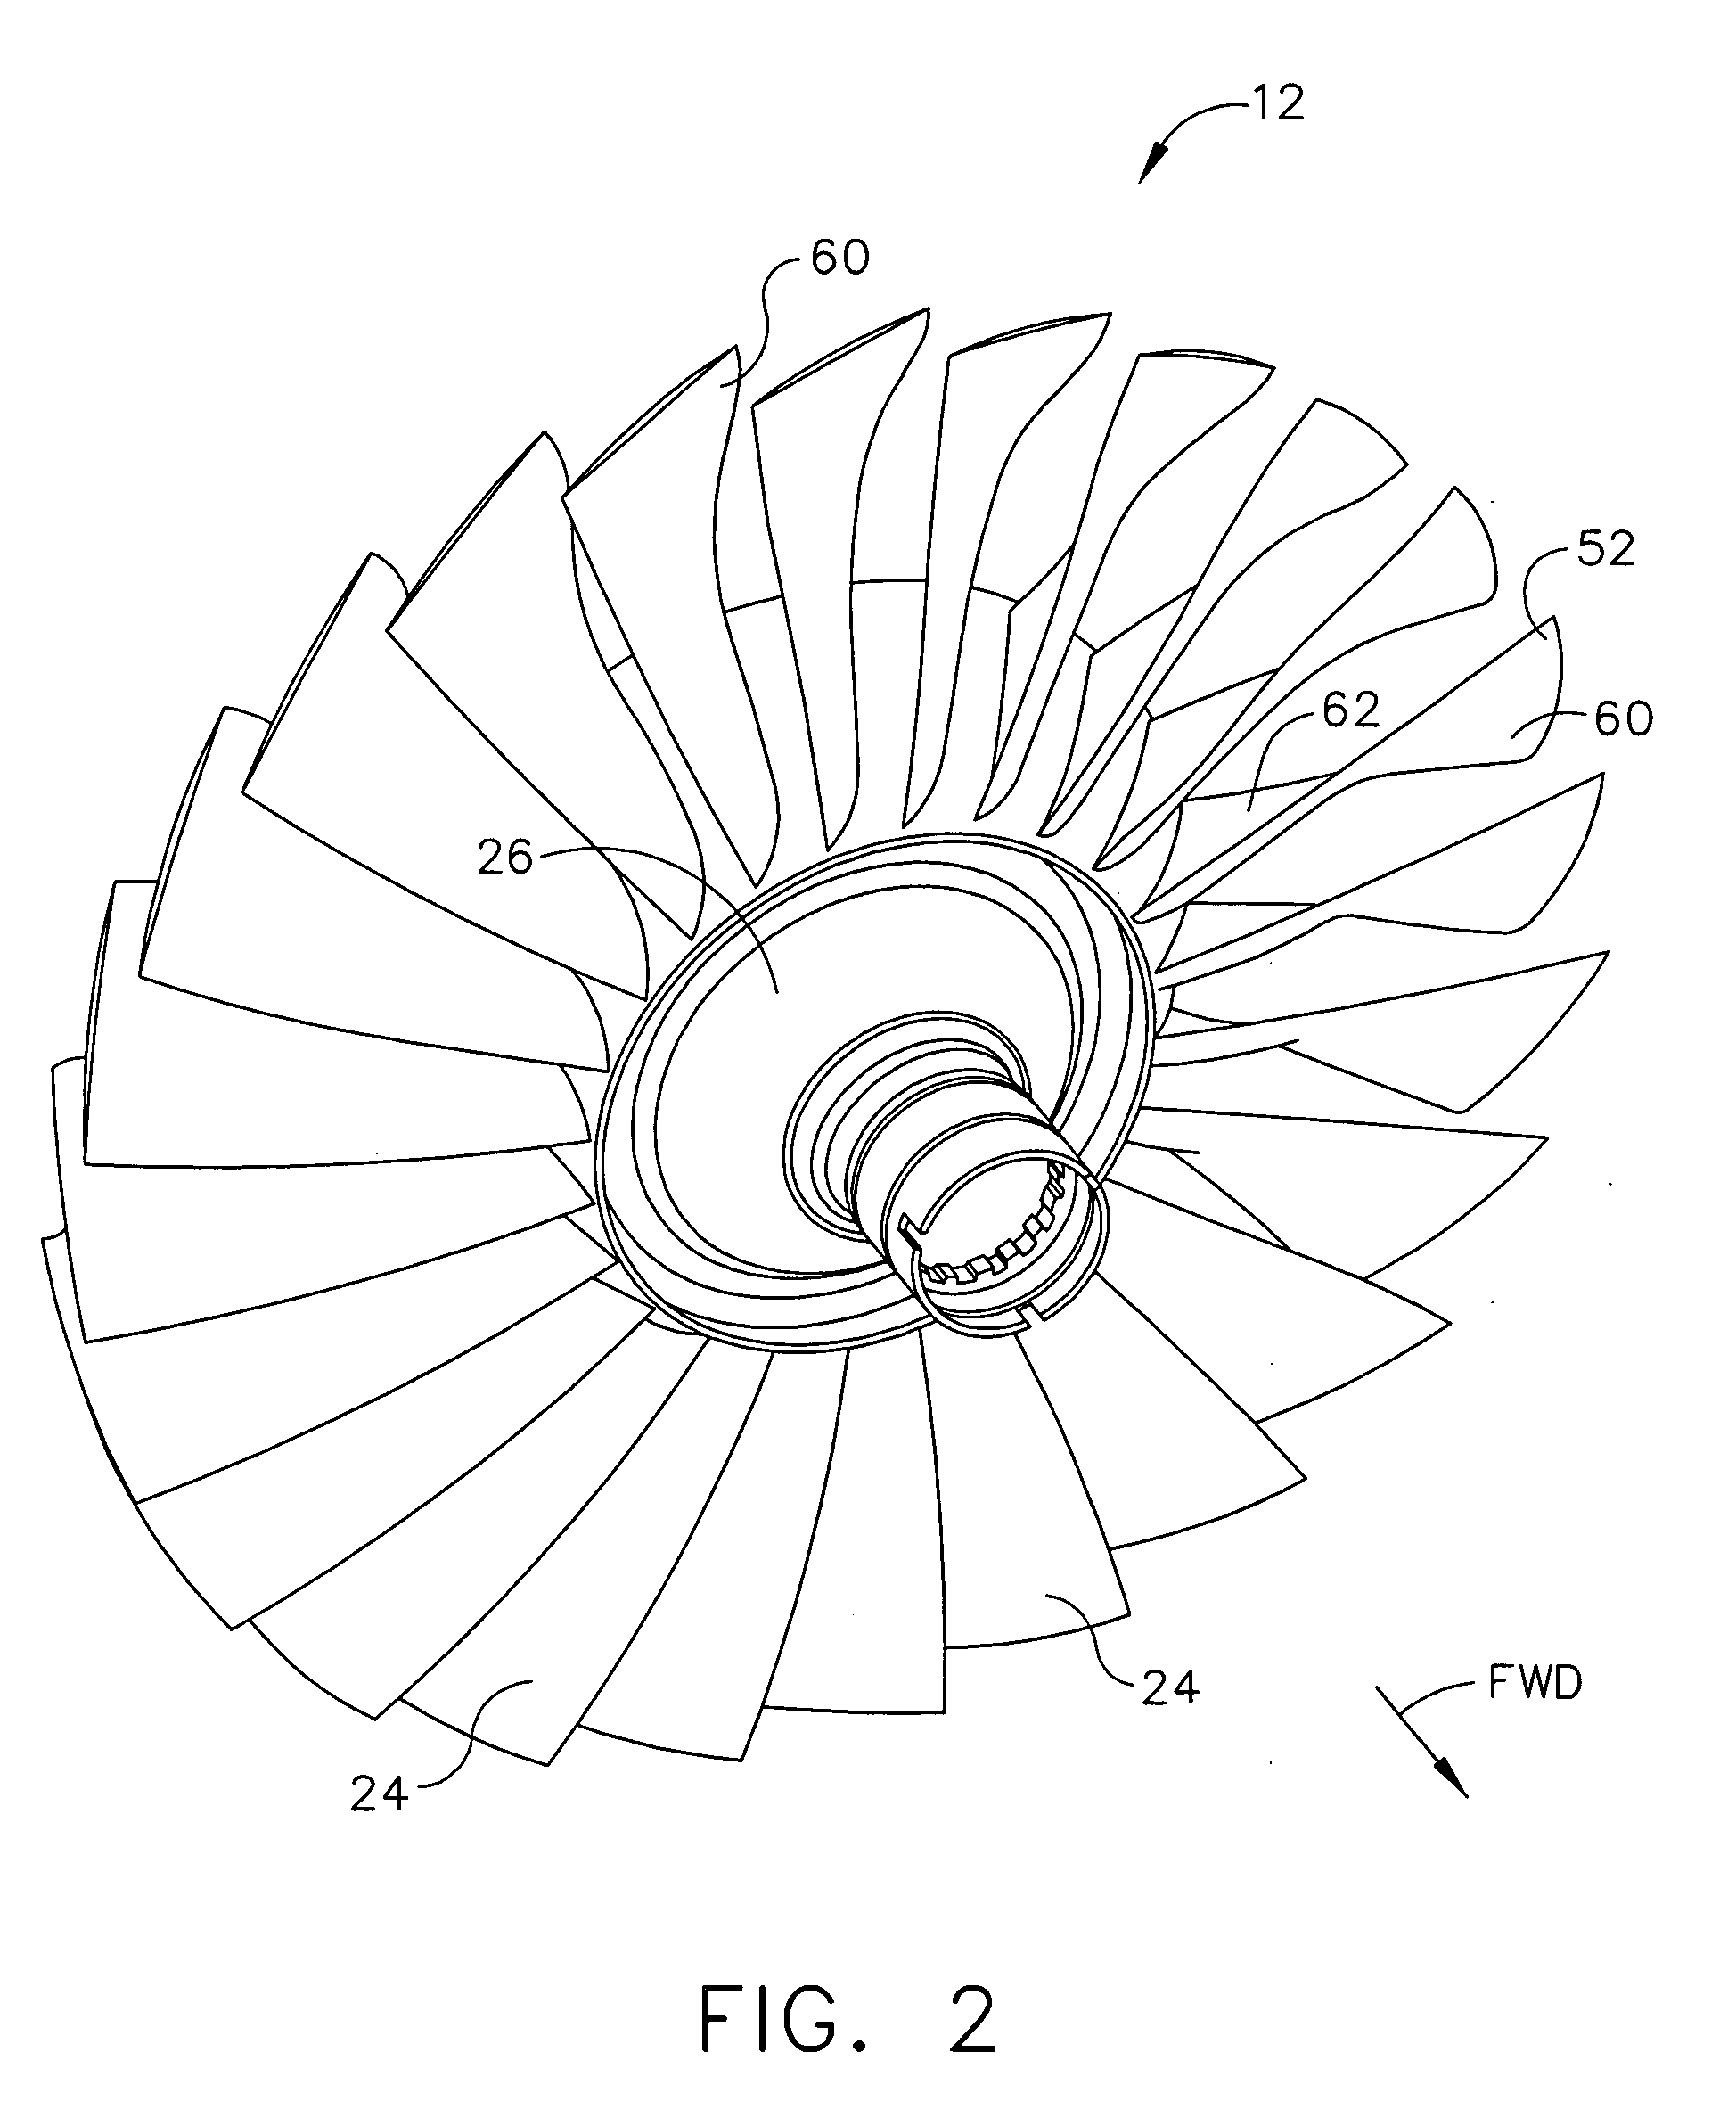 Methods and apparatus for gas turbine engines